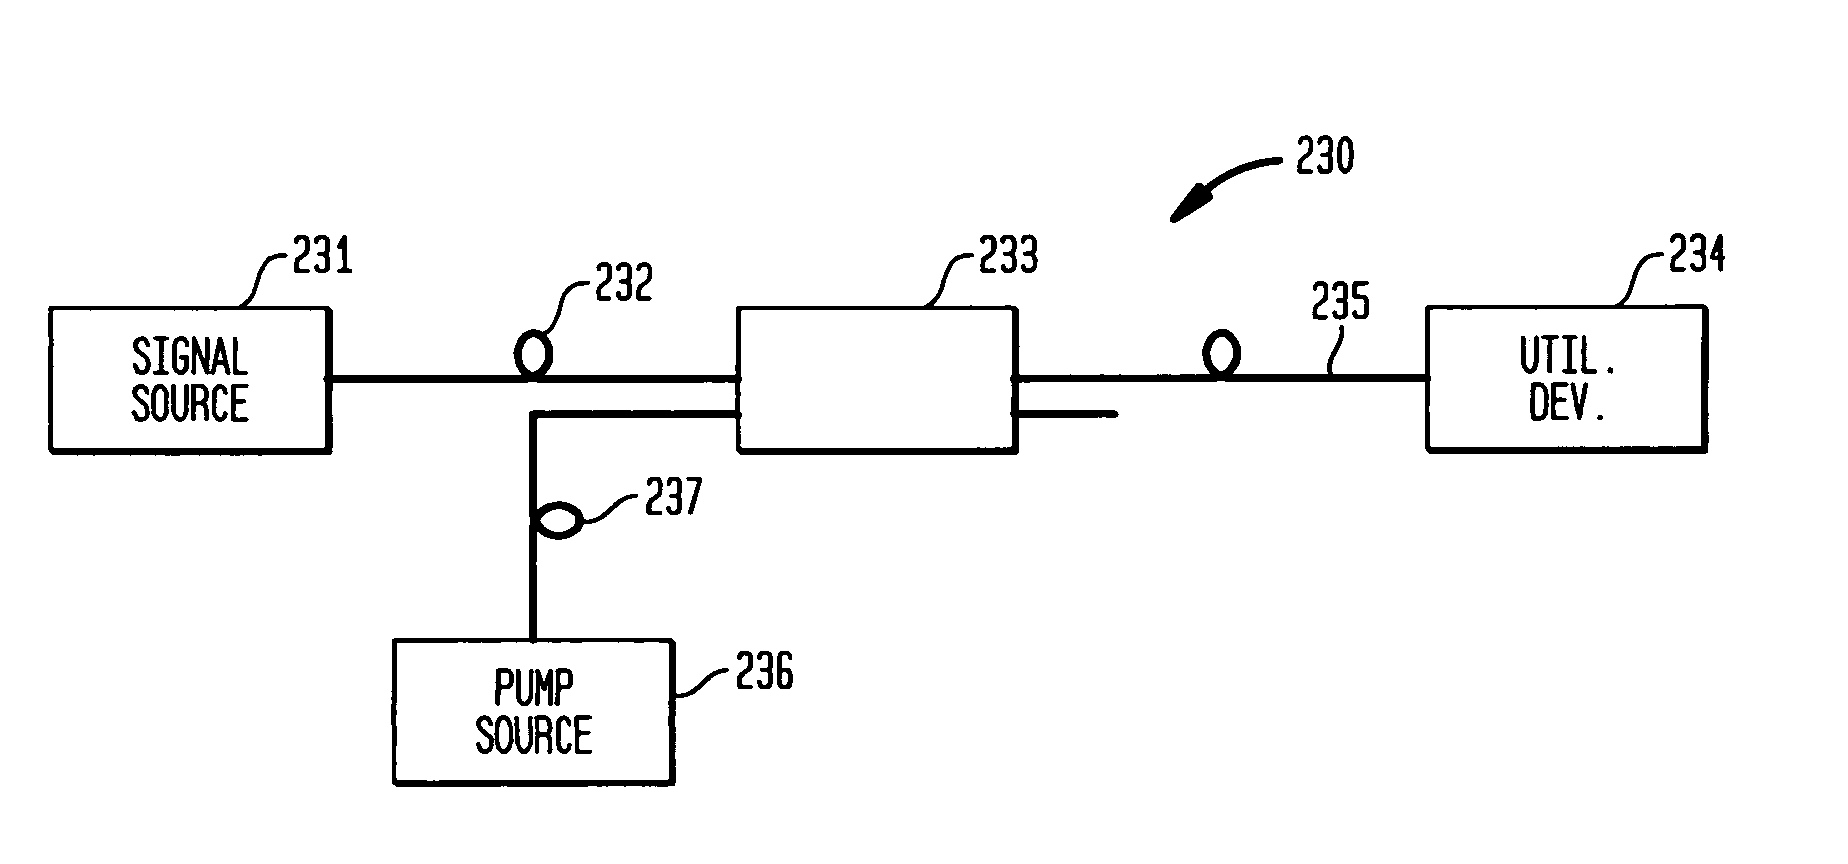 Large-mode-area optical fibers with reduced bend distortion